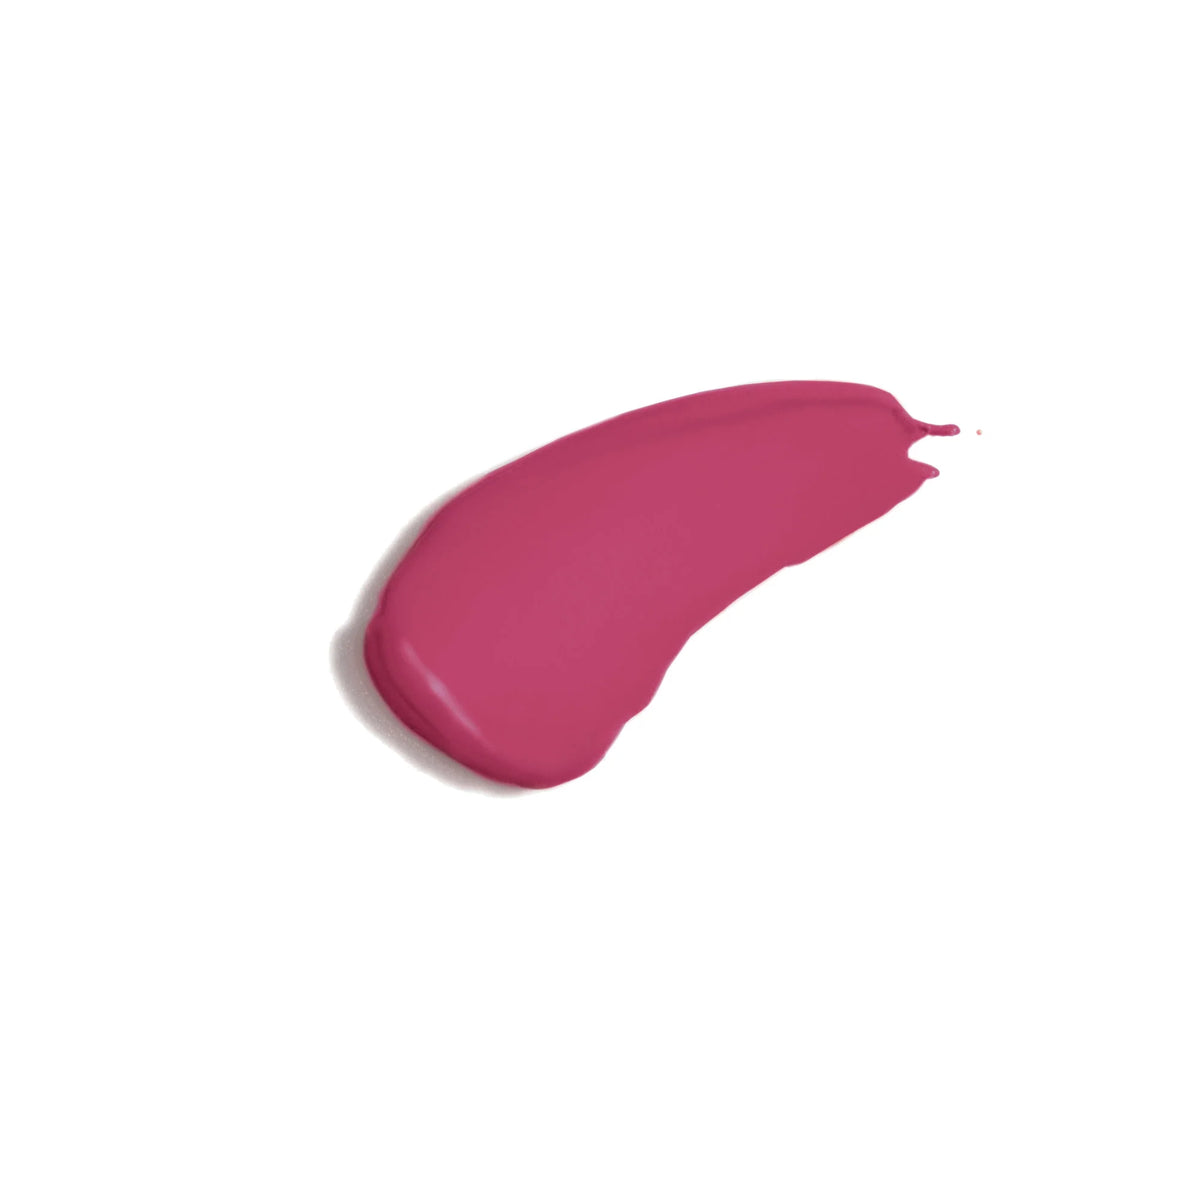 Tok beauty lip tonic in wild pink color swatch